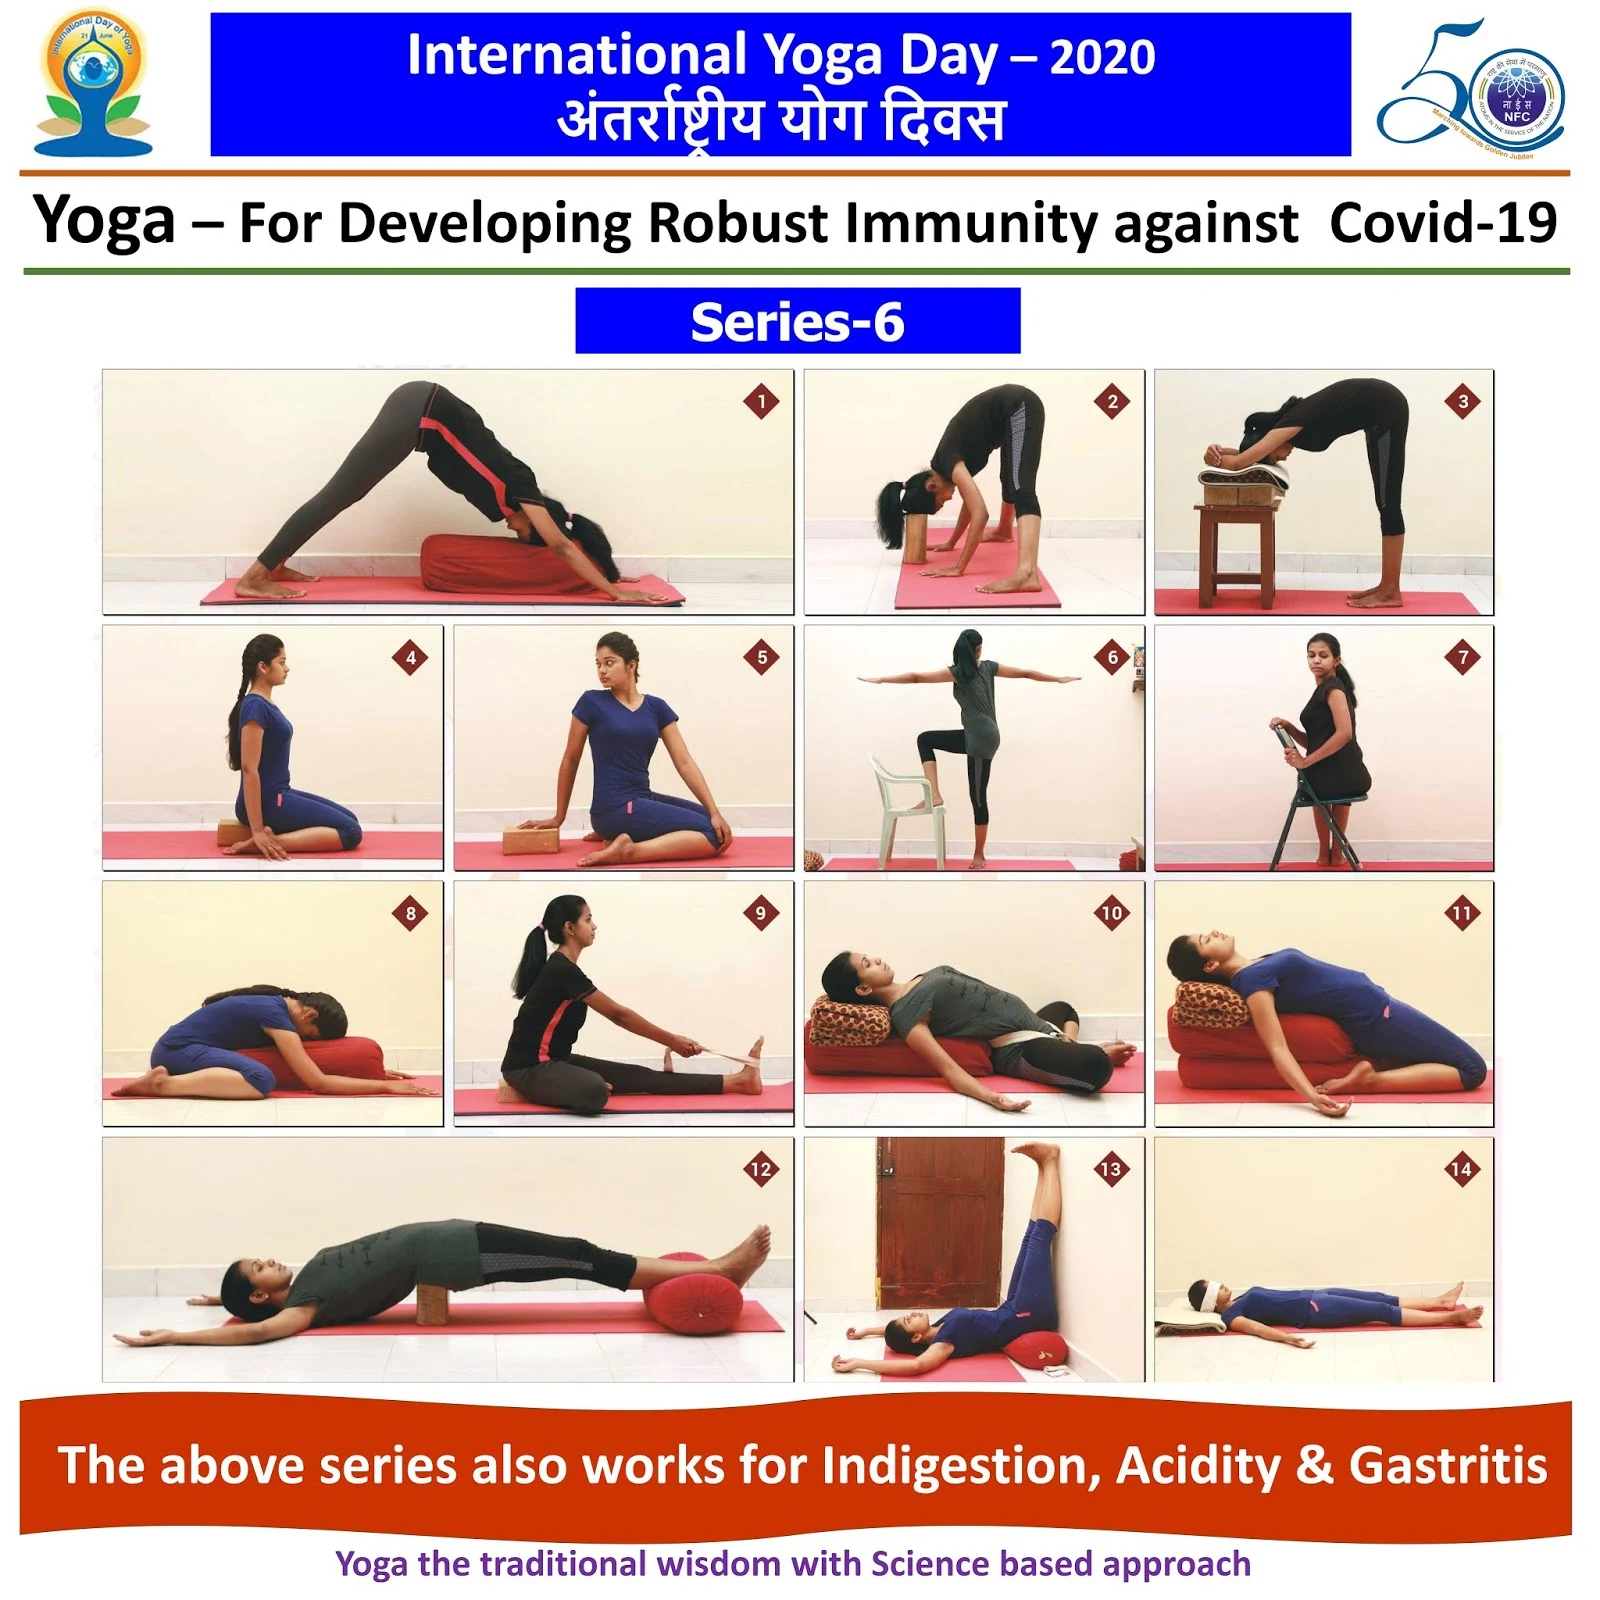 Happy International Yoga Day ... This series also works for Indigestion, Acidity & Gastritis